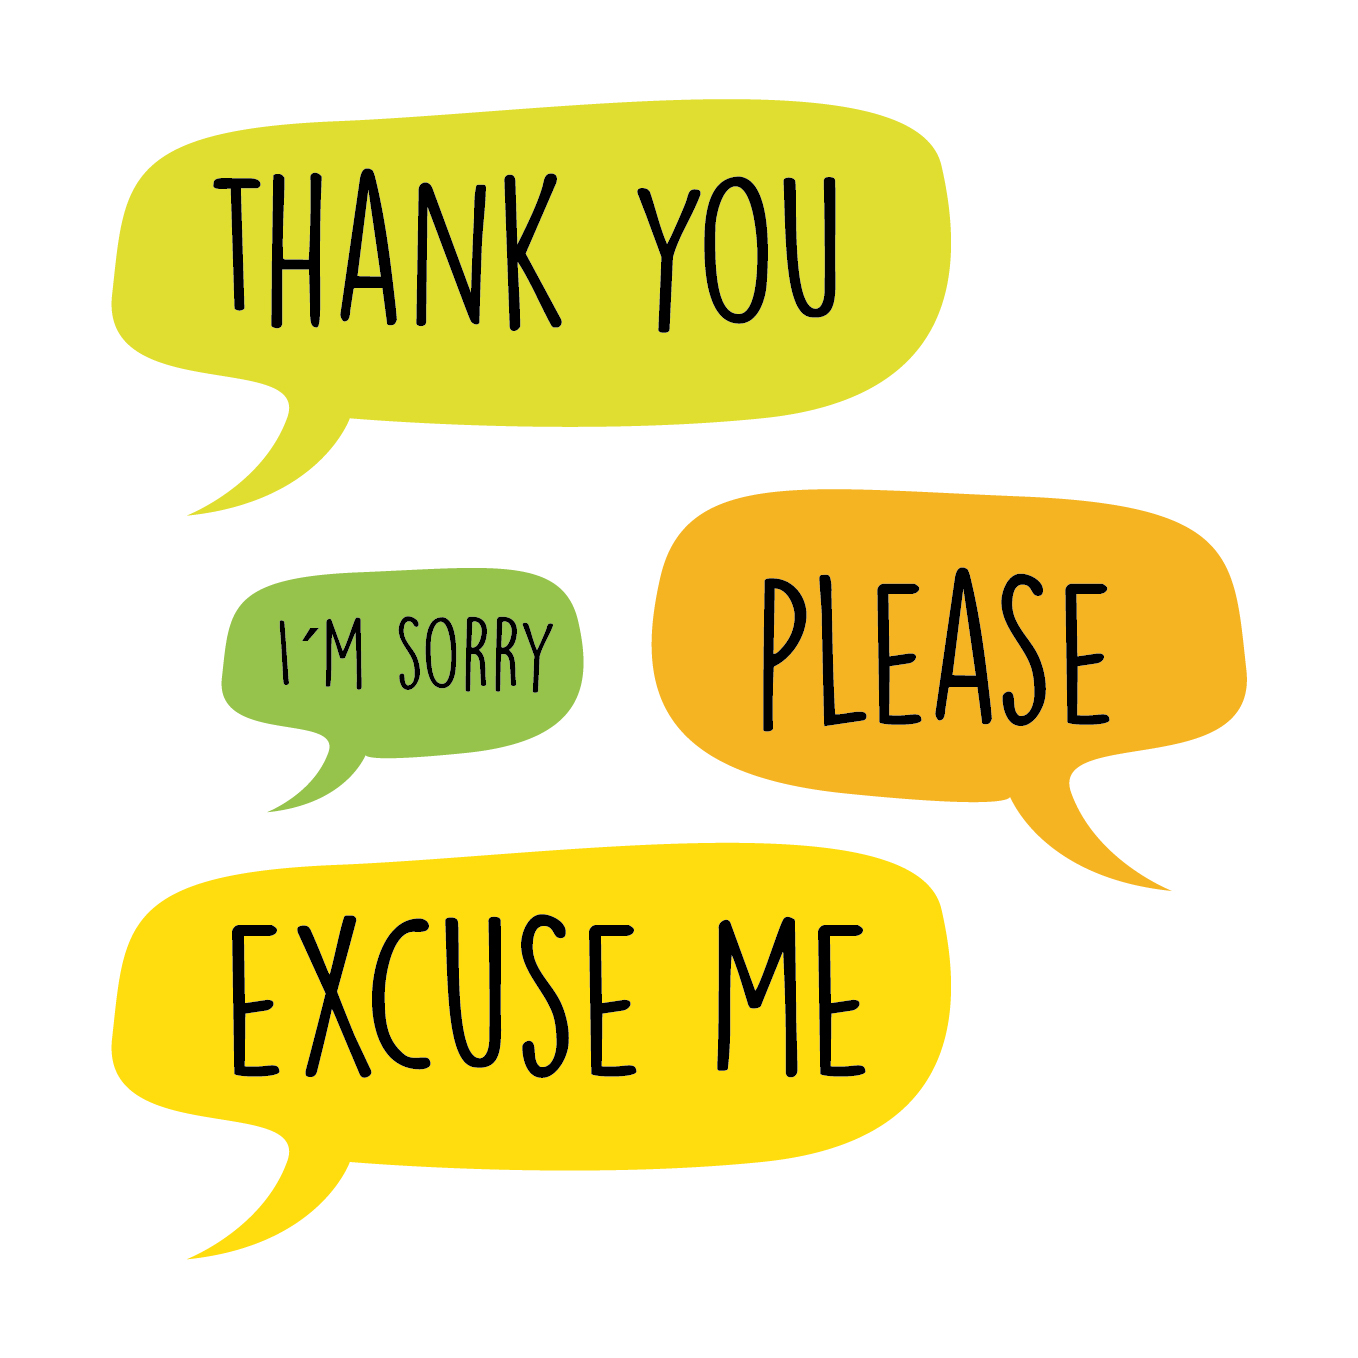 clipart on good manners - photo #9